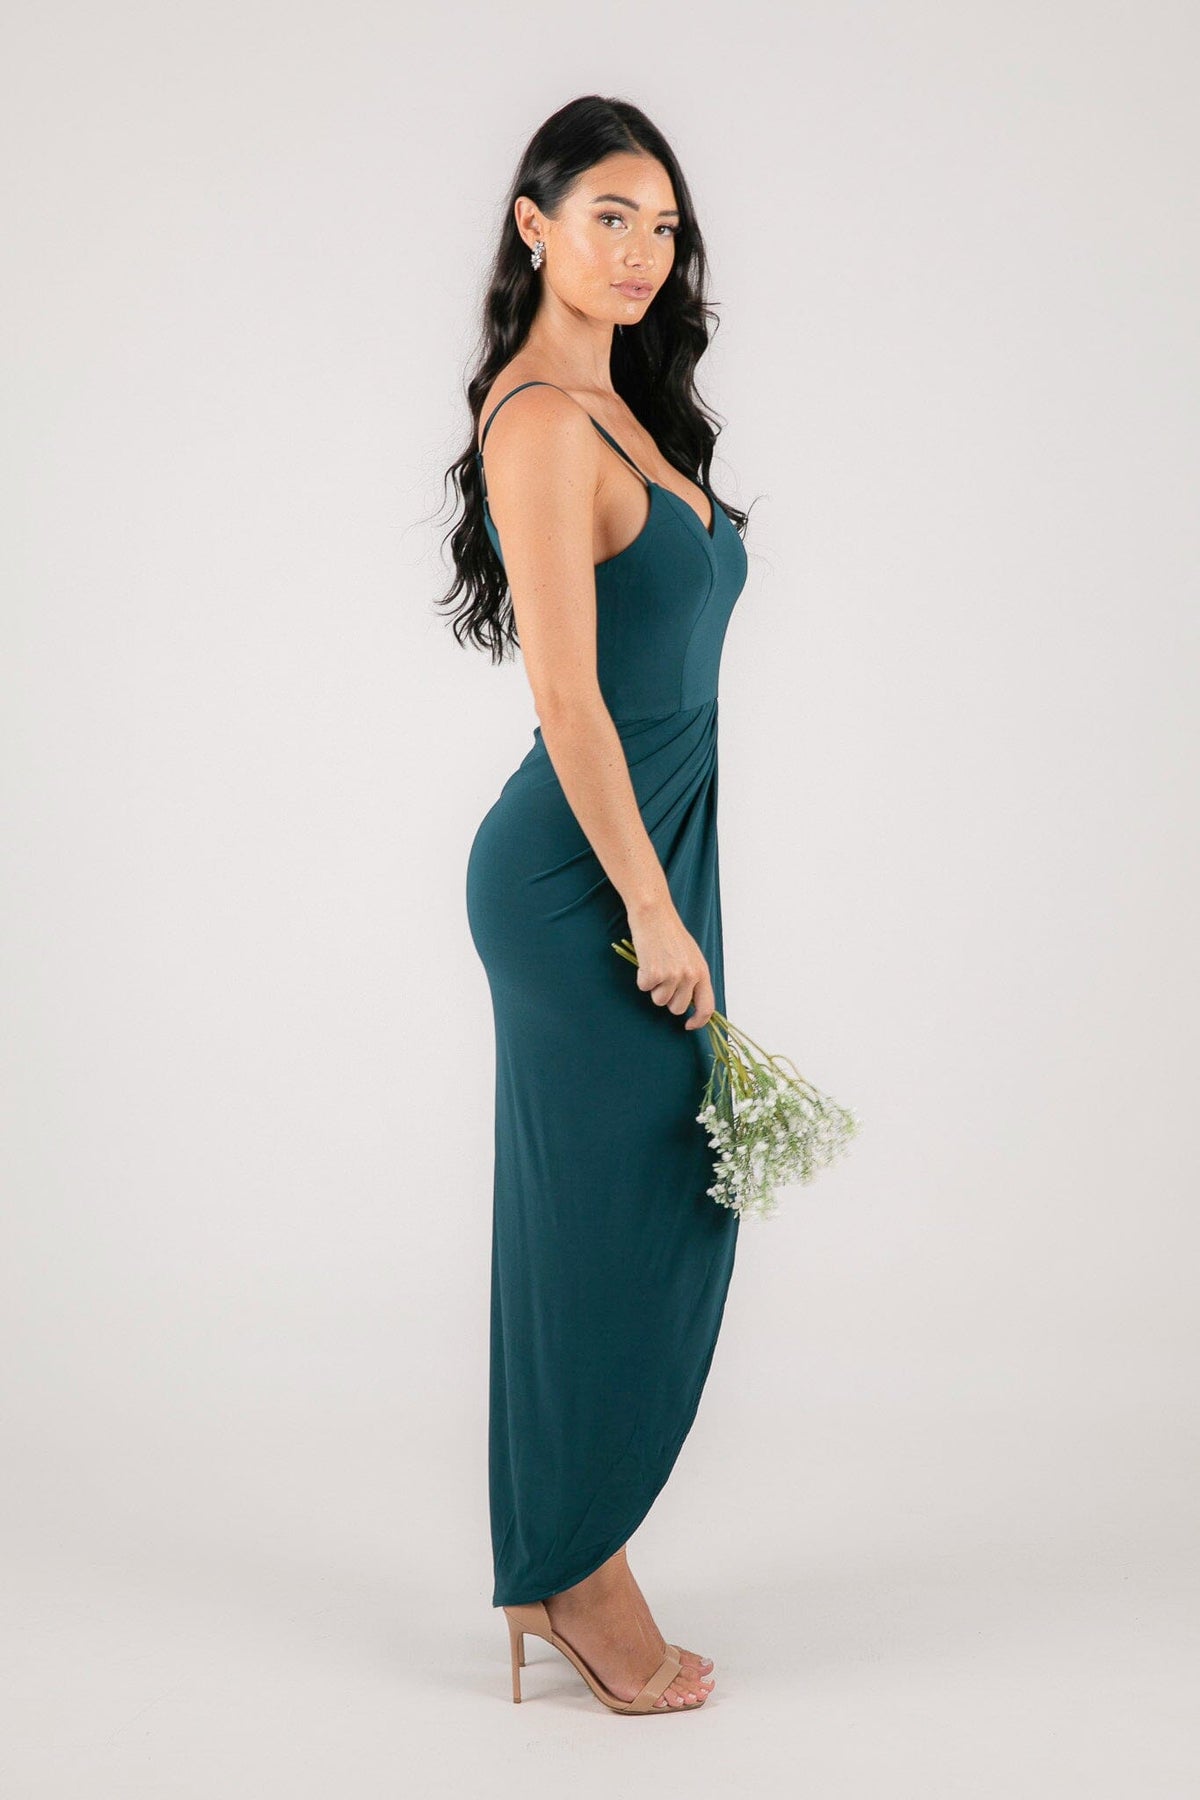 Side Image of Teal Green Bridesmaid Maxi Dress with Faux Wrap Front Design and Asymmetrical Slim-Fit Skirt with Centre Split